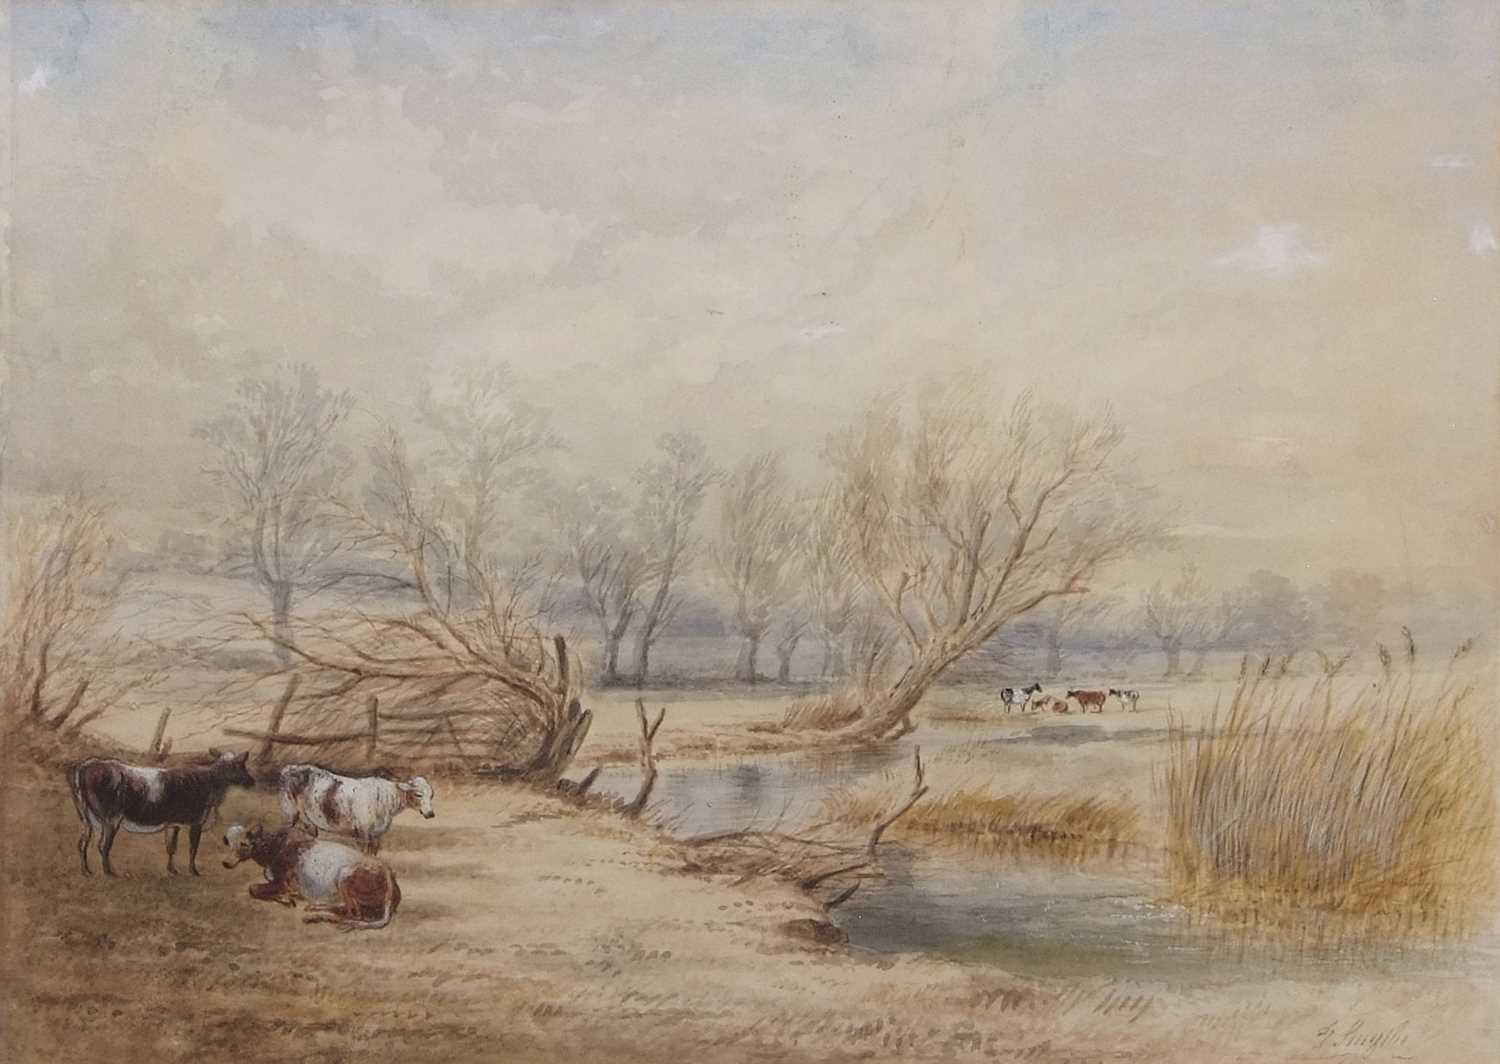 Thomas Smythe (British, 1825-1906), Cattle grazing by a meandering river, watercolour (part